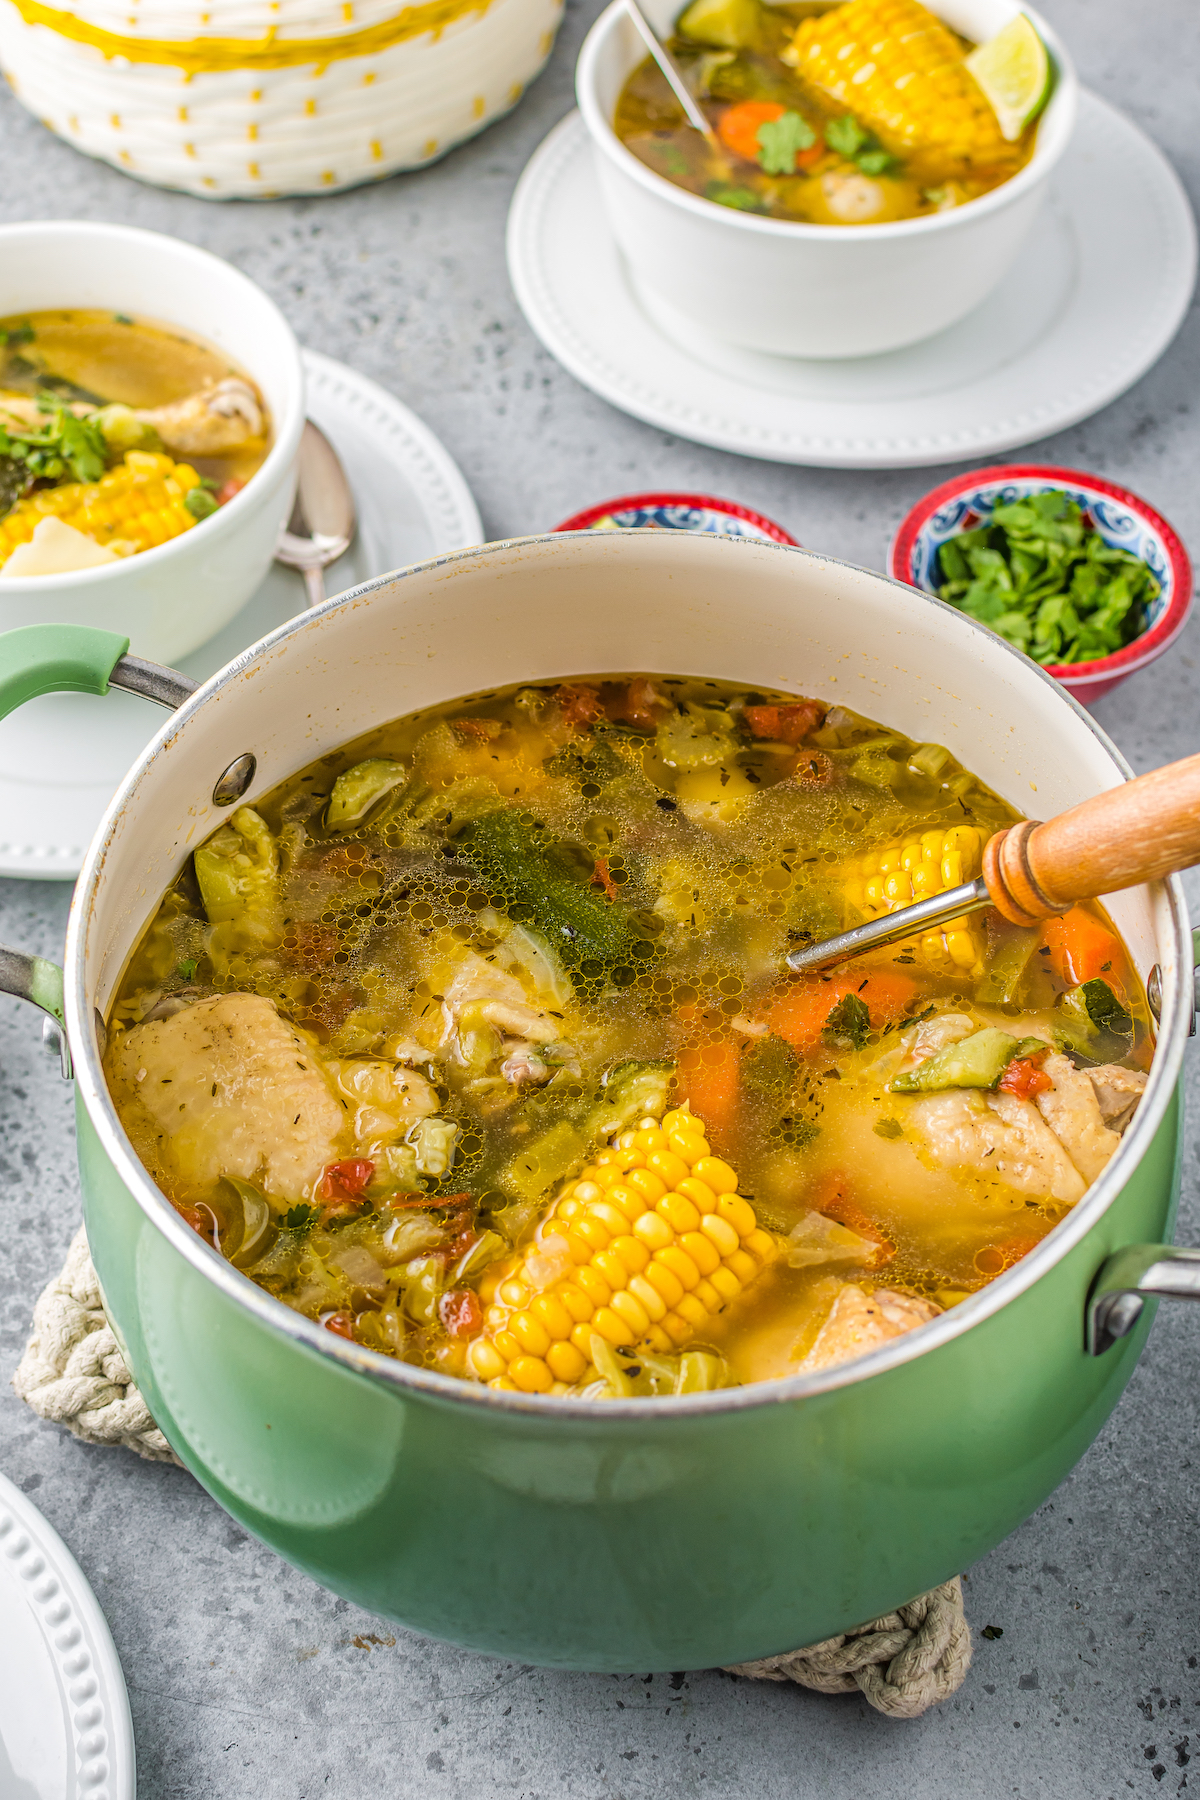 A pot of Mexican chicken stew iwth corn on the cop, pieces of chicken, other vegetables, and herbs